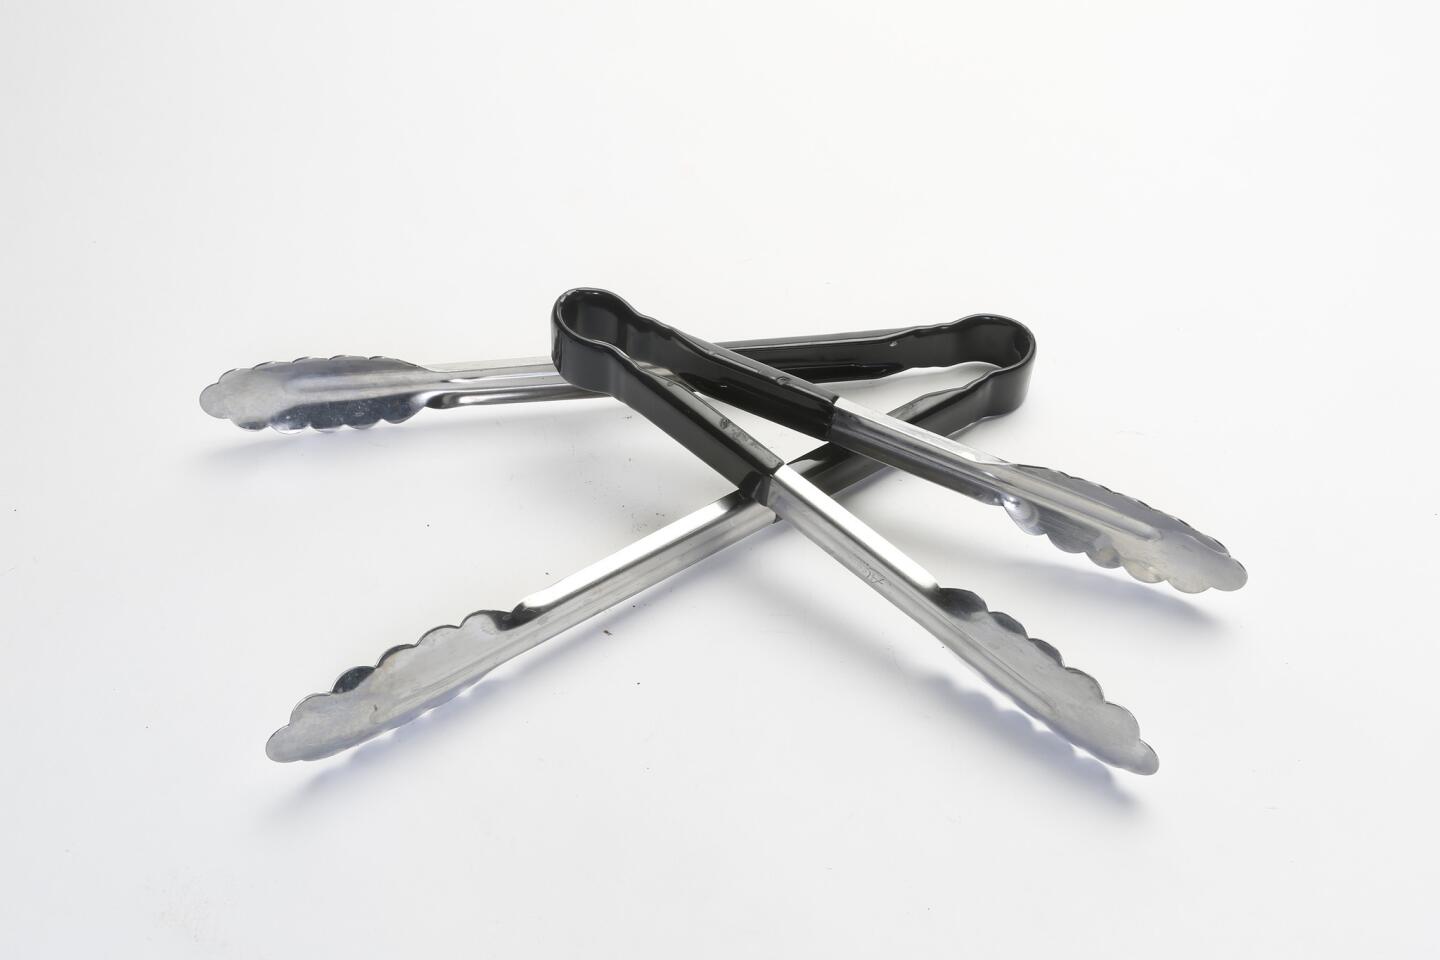 Tongs let you turn food without hurting it.